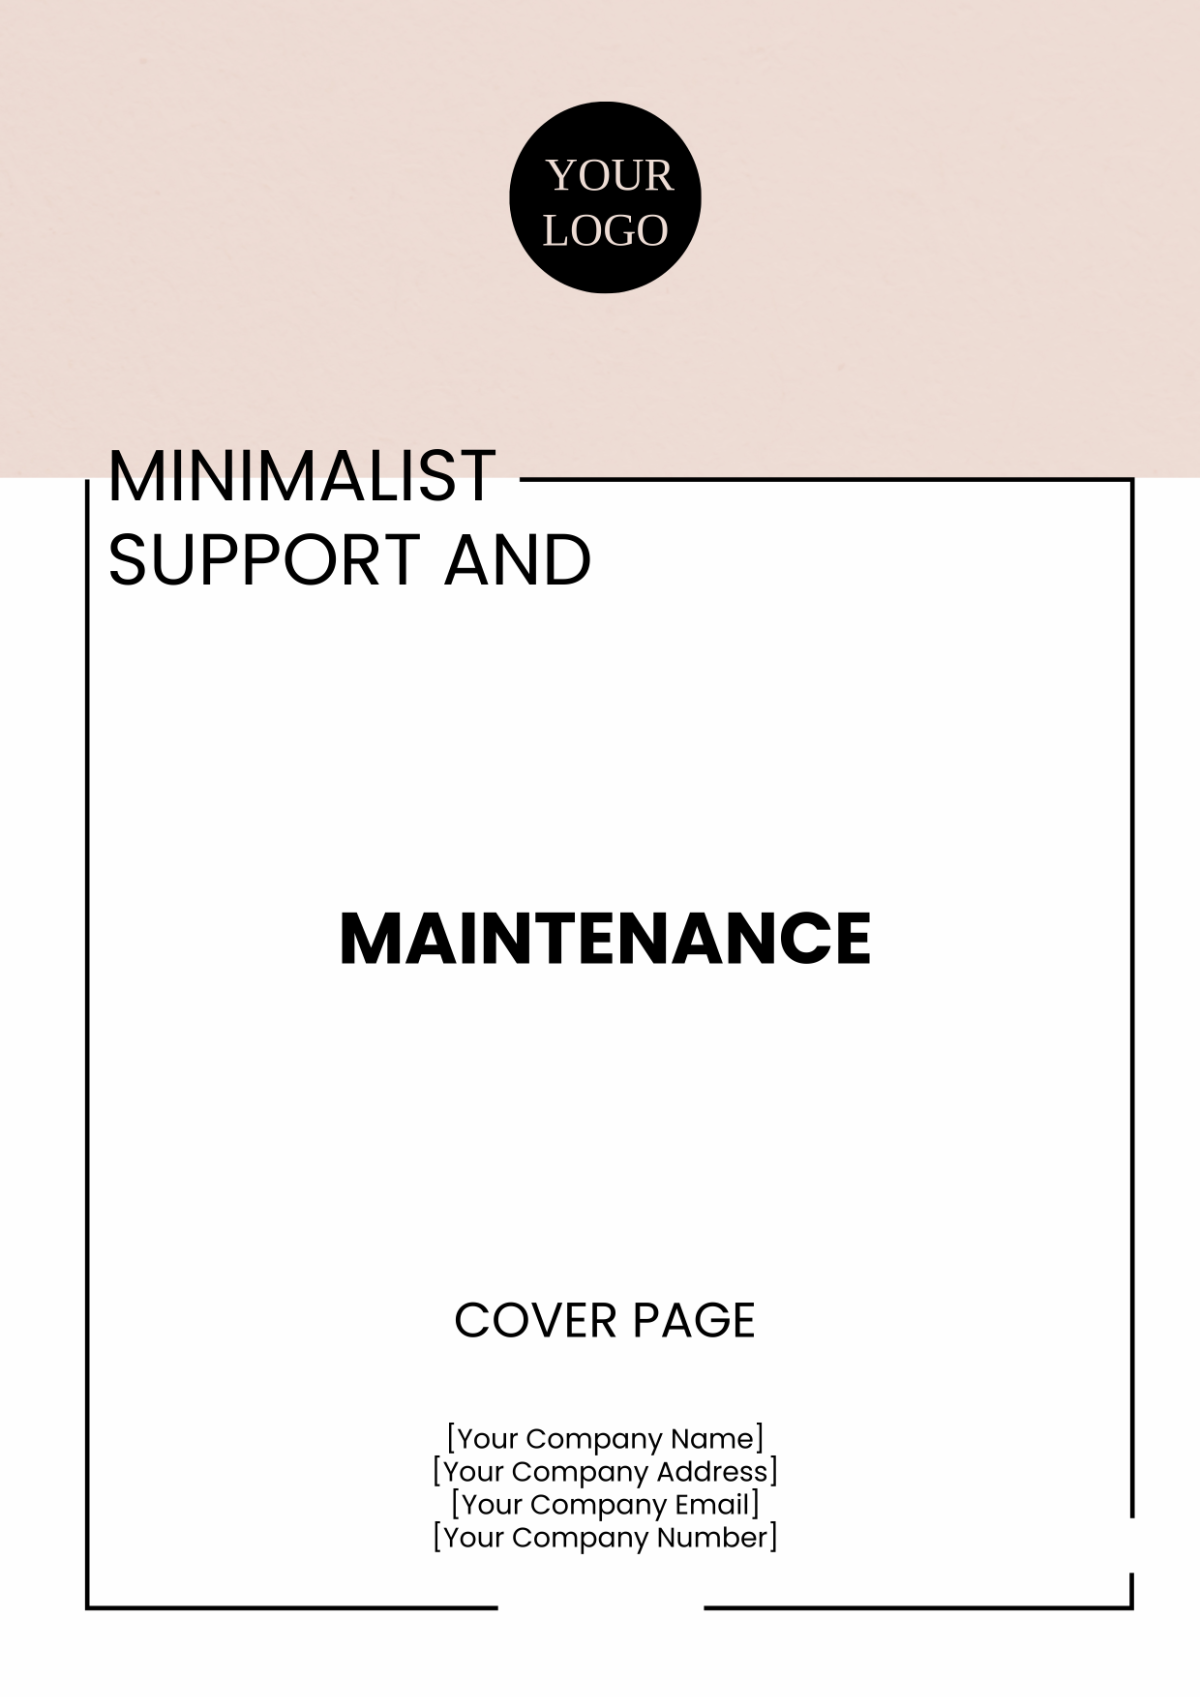 Minimalist Support and Maintenance Cover Page